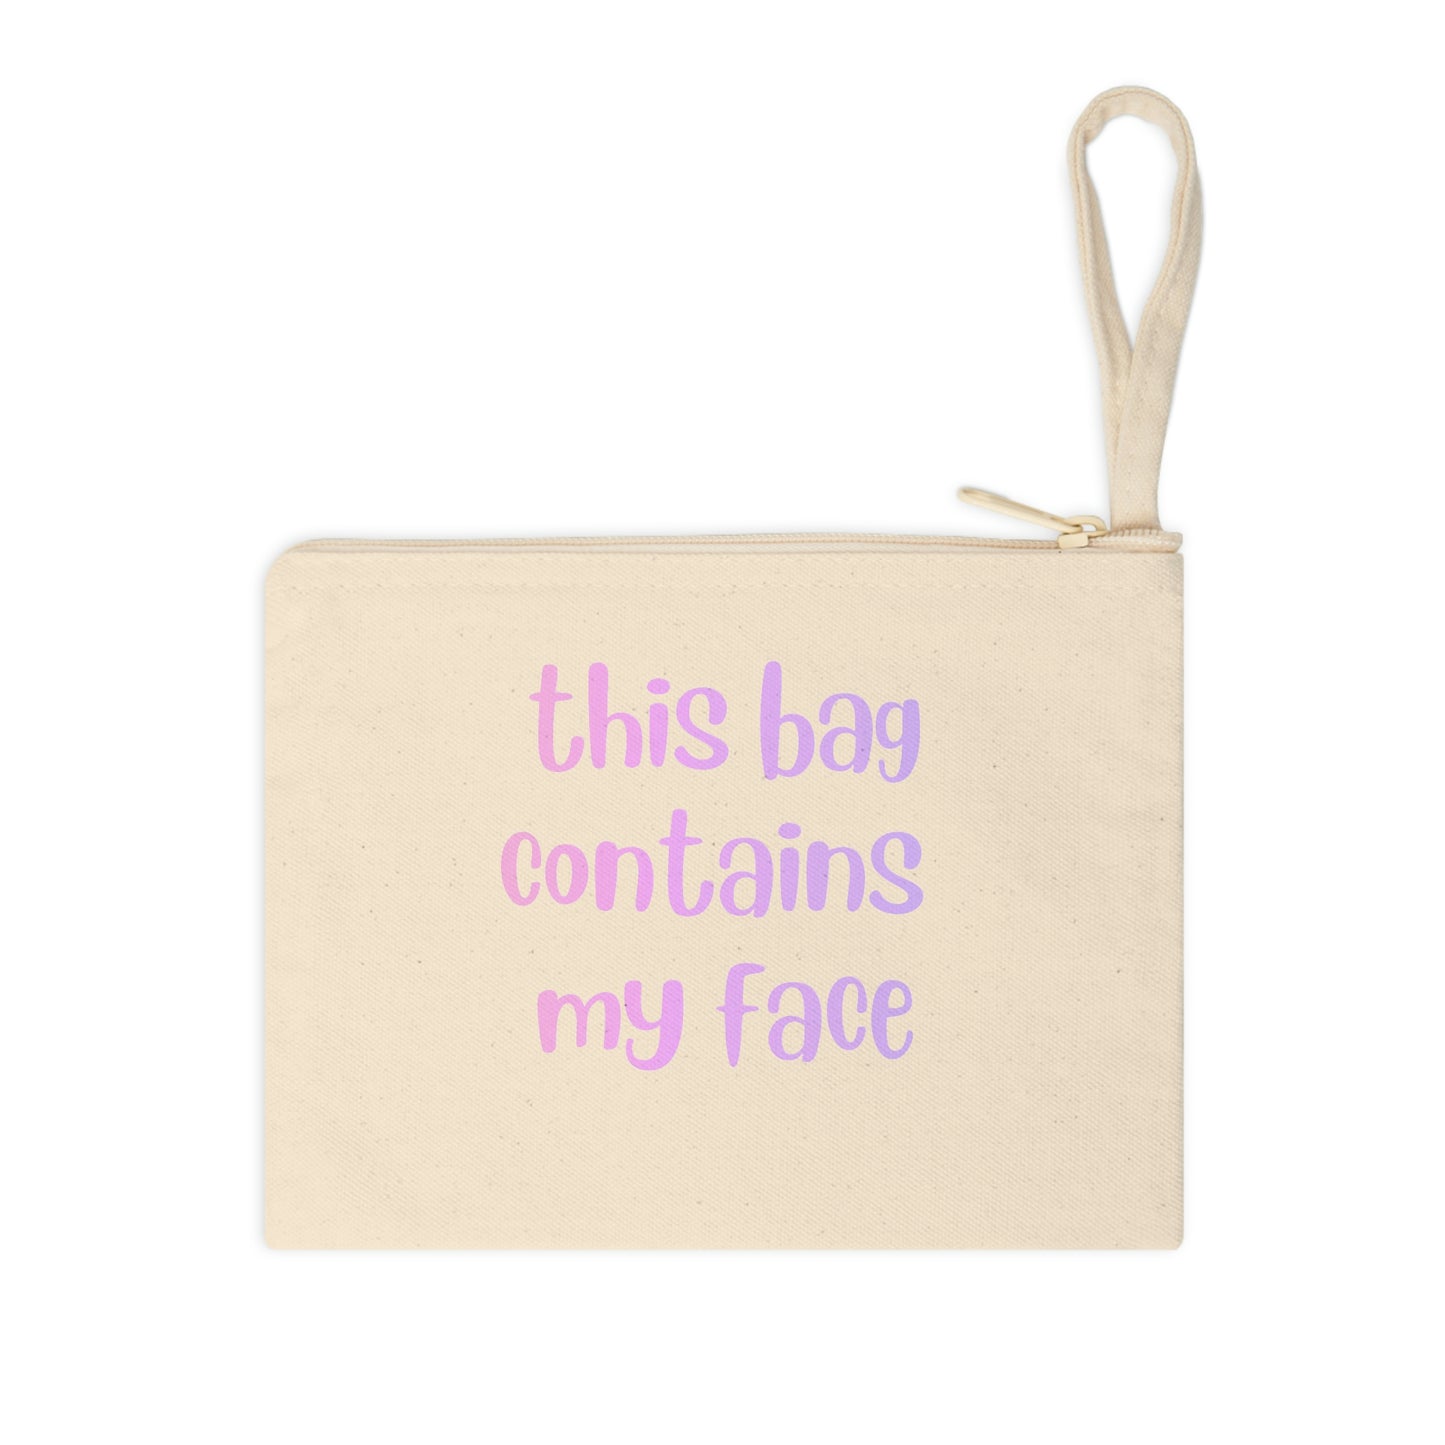 This bag contains my face cotton  Zipper Pouch 8.3" x 7.8, bridesmaid gift, travel pouch, makeup bag